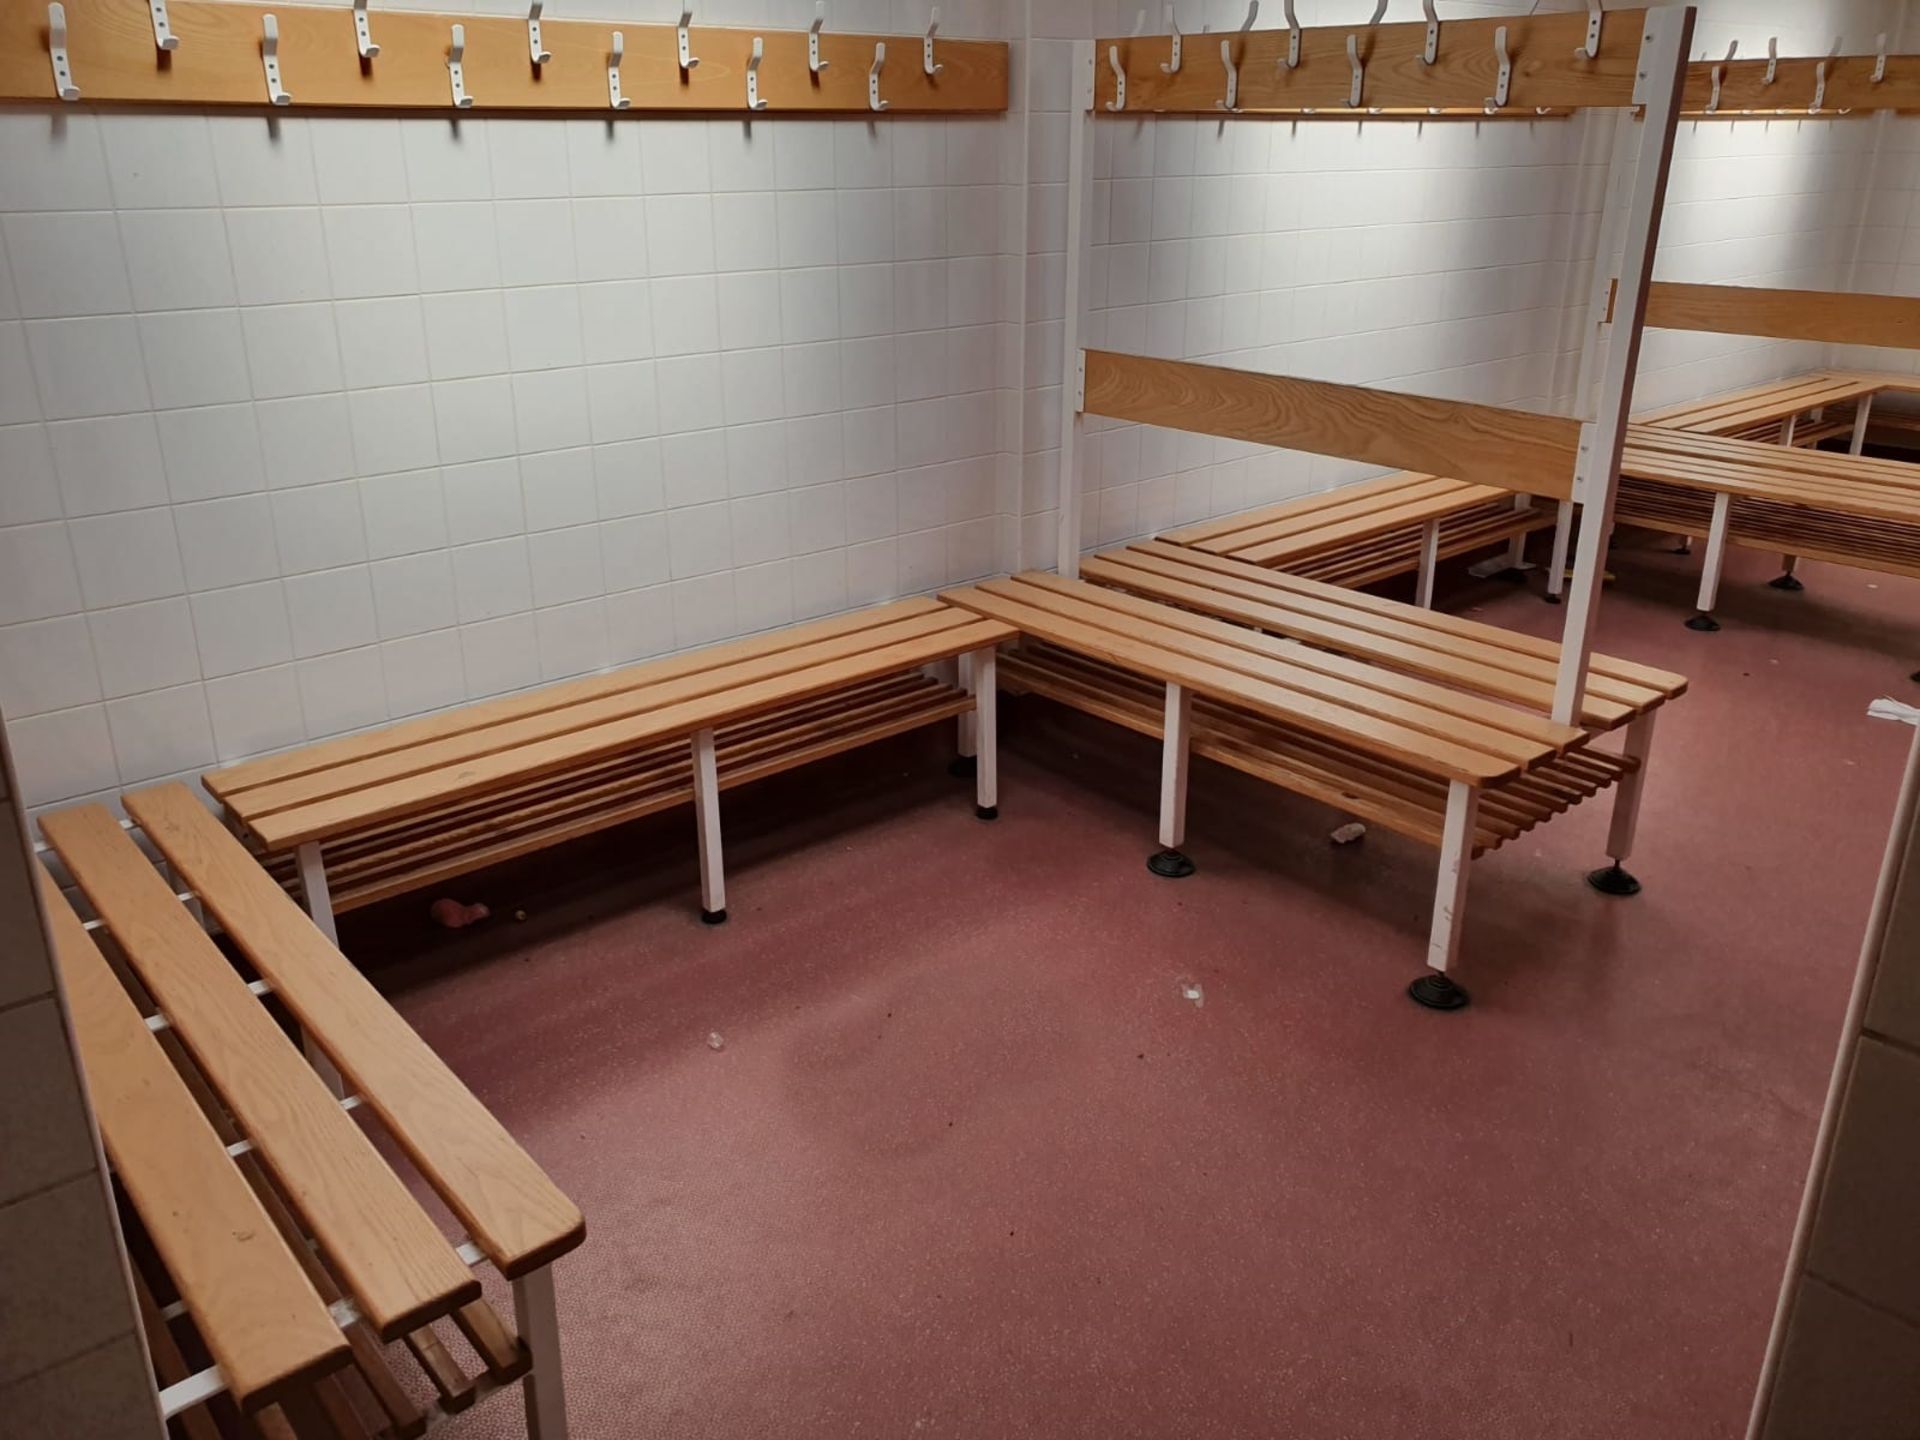 12 x Pieces of Sports Changing Room Furniture - Includes 5 x Benches, 5 x Coak Hooks and 2 x Back to - Image 4 of 4